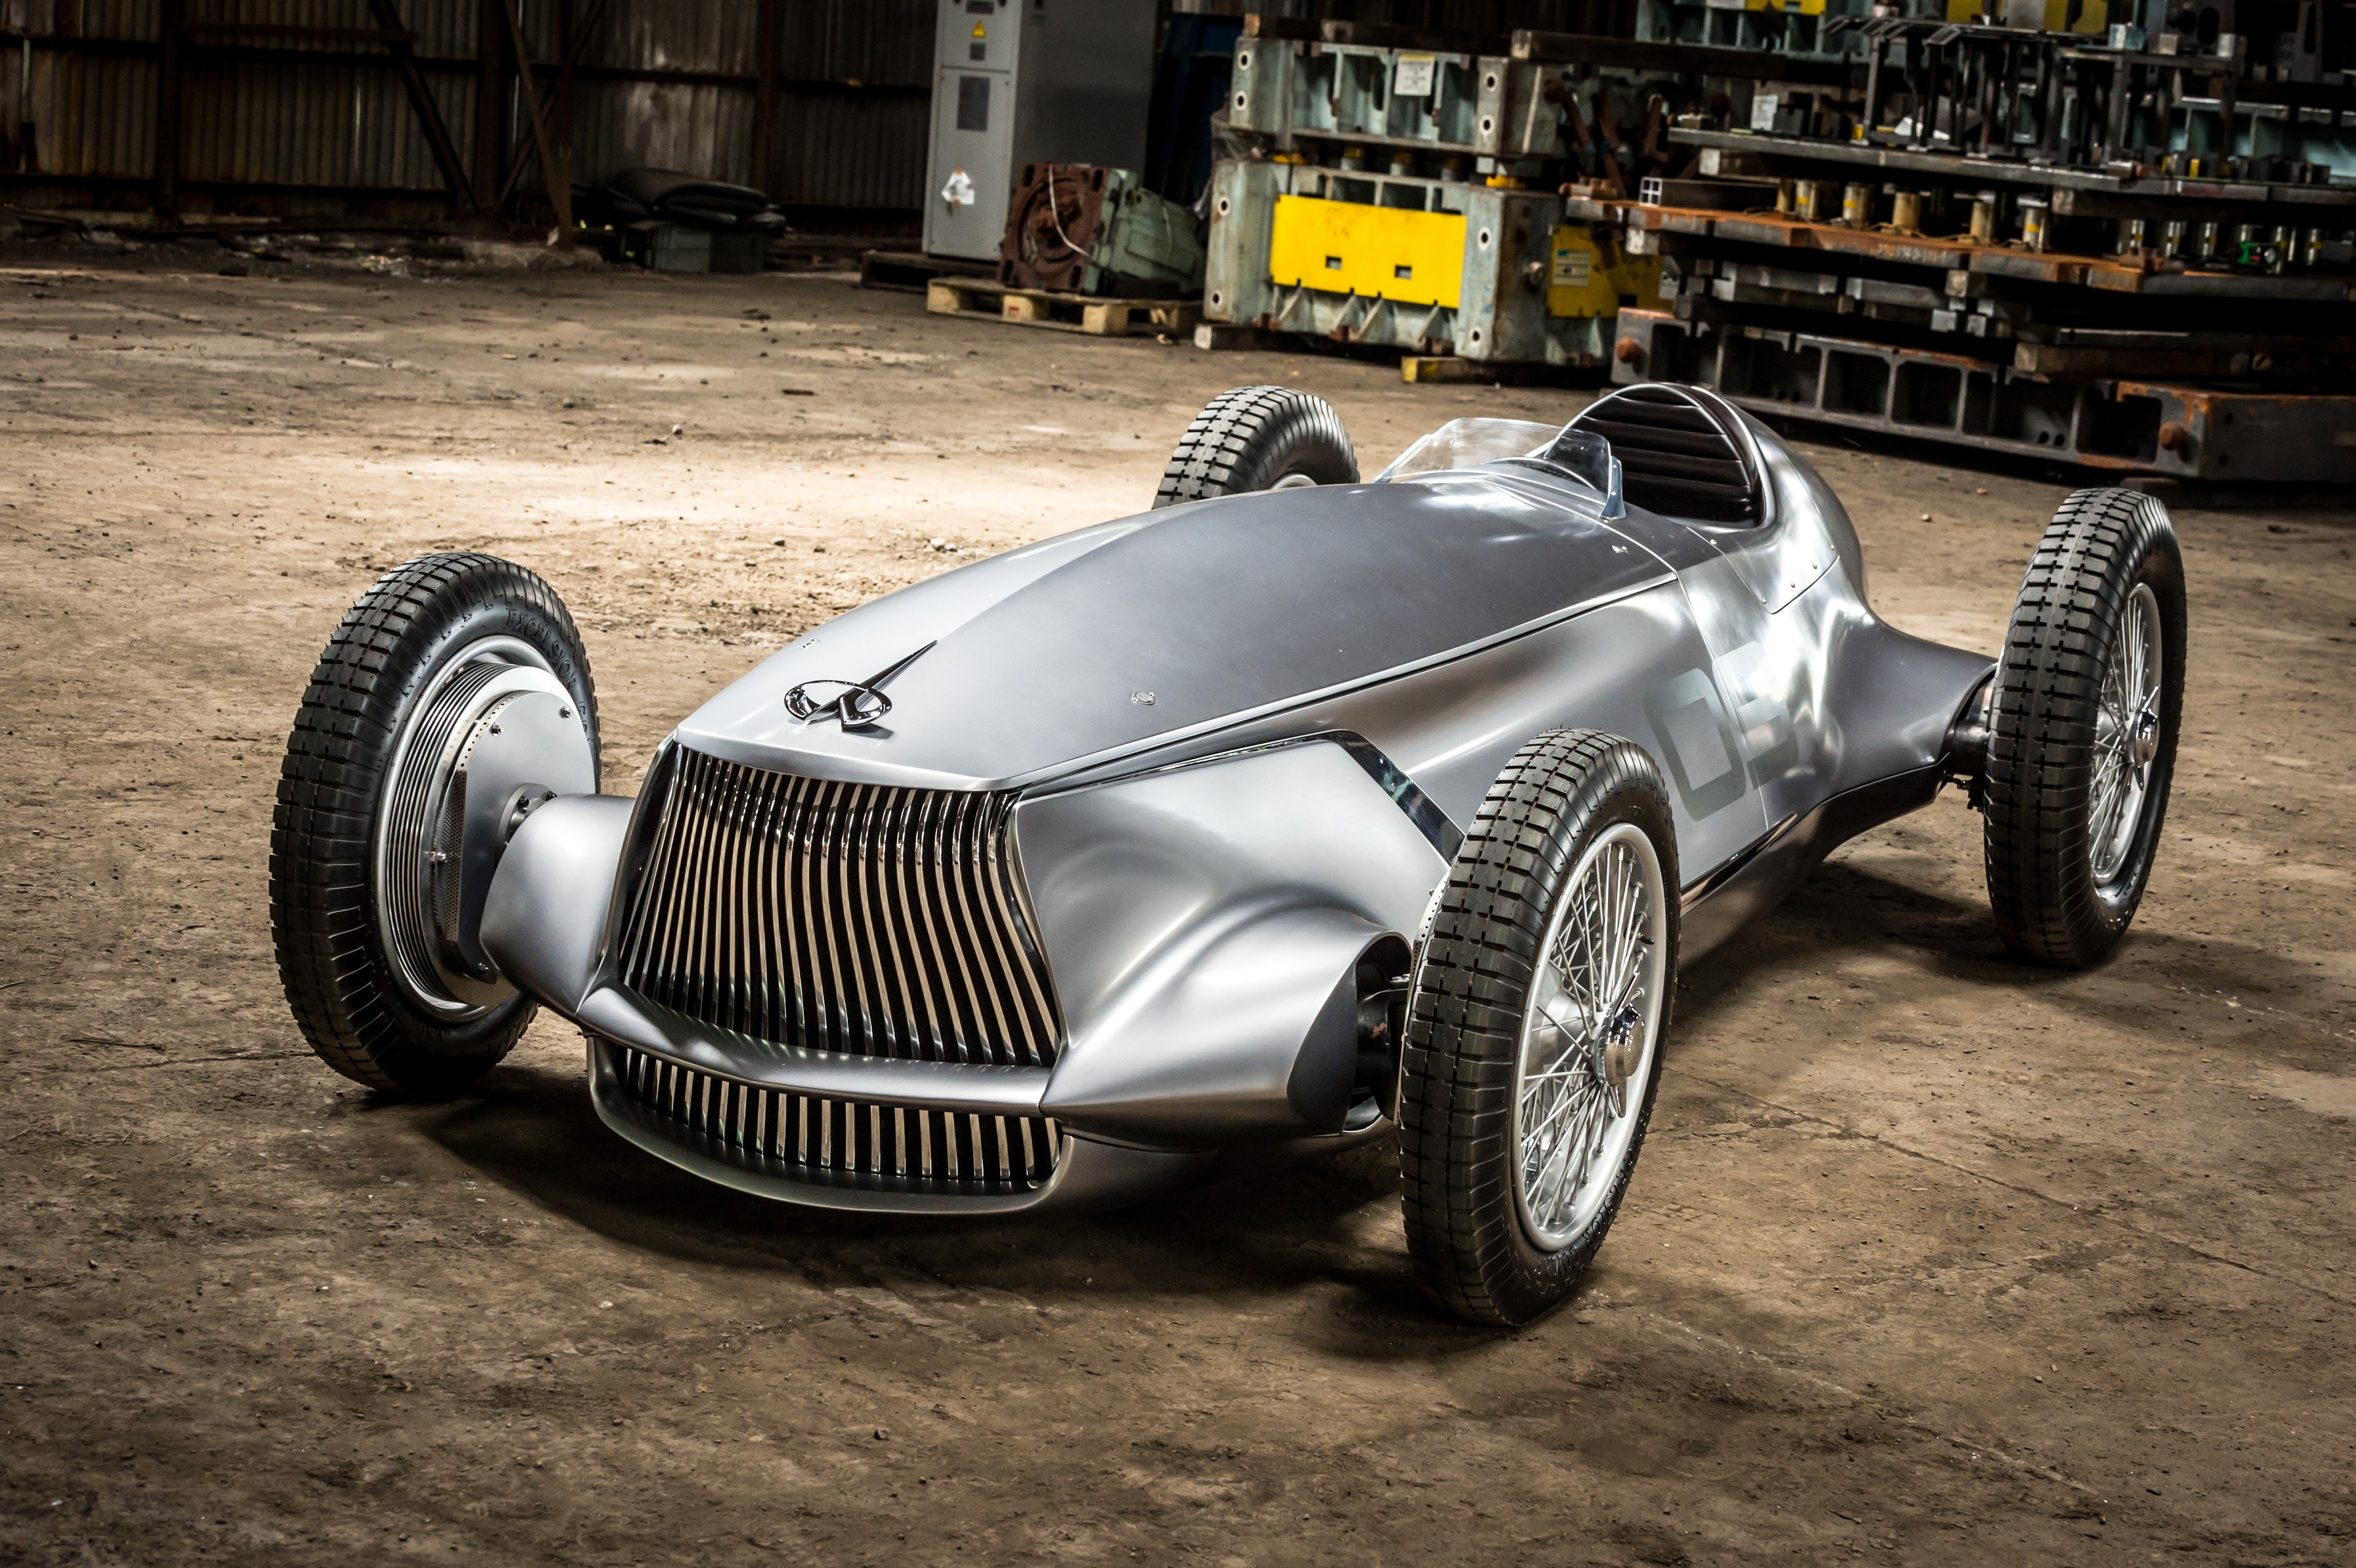 The world’s motoring elite loved the design of Infiniti's Prototype 9 one-seater. Photo: SCMP Handout